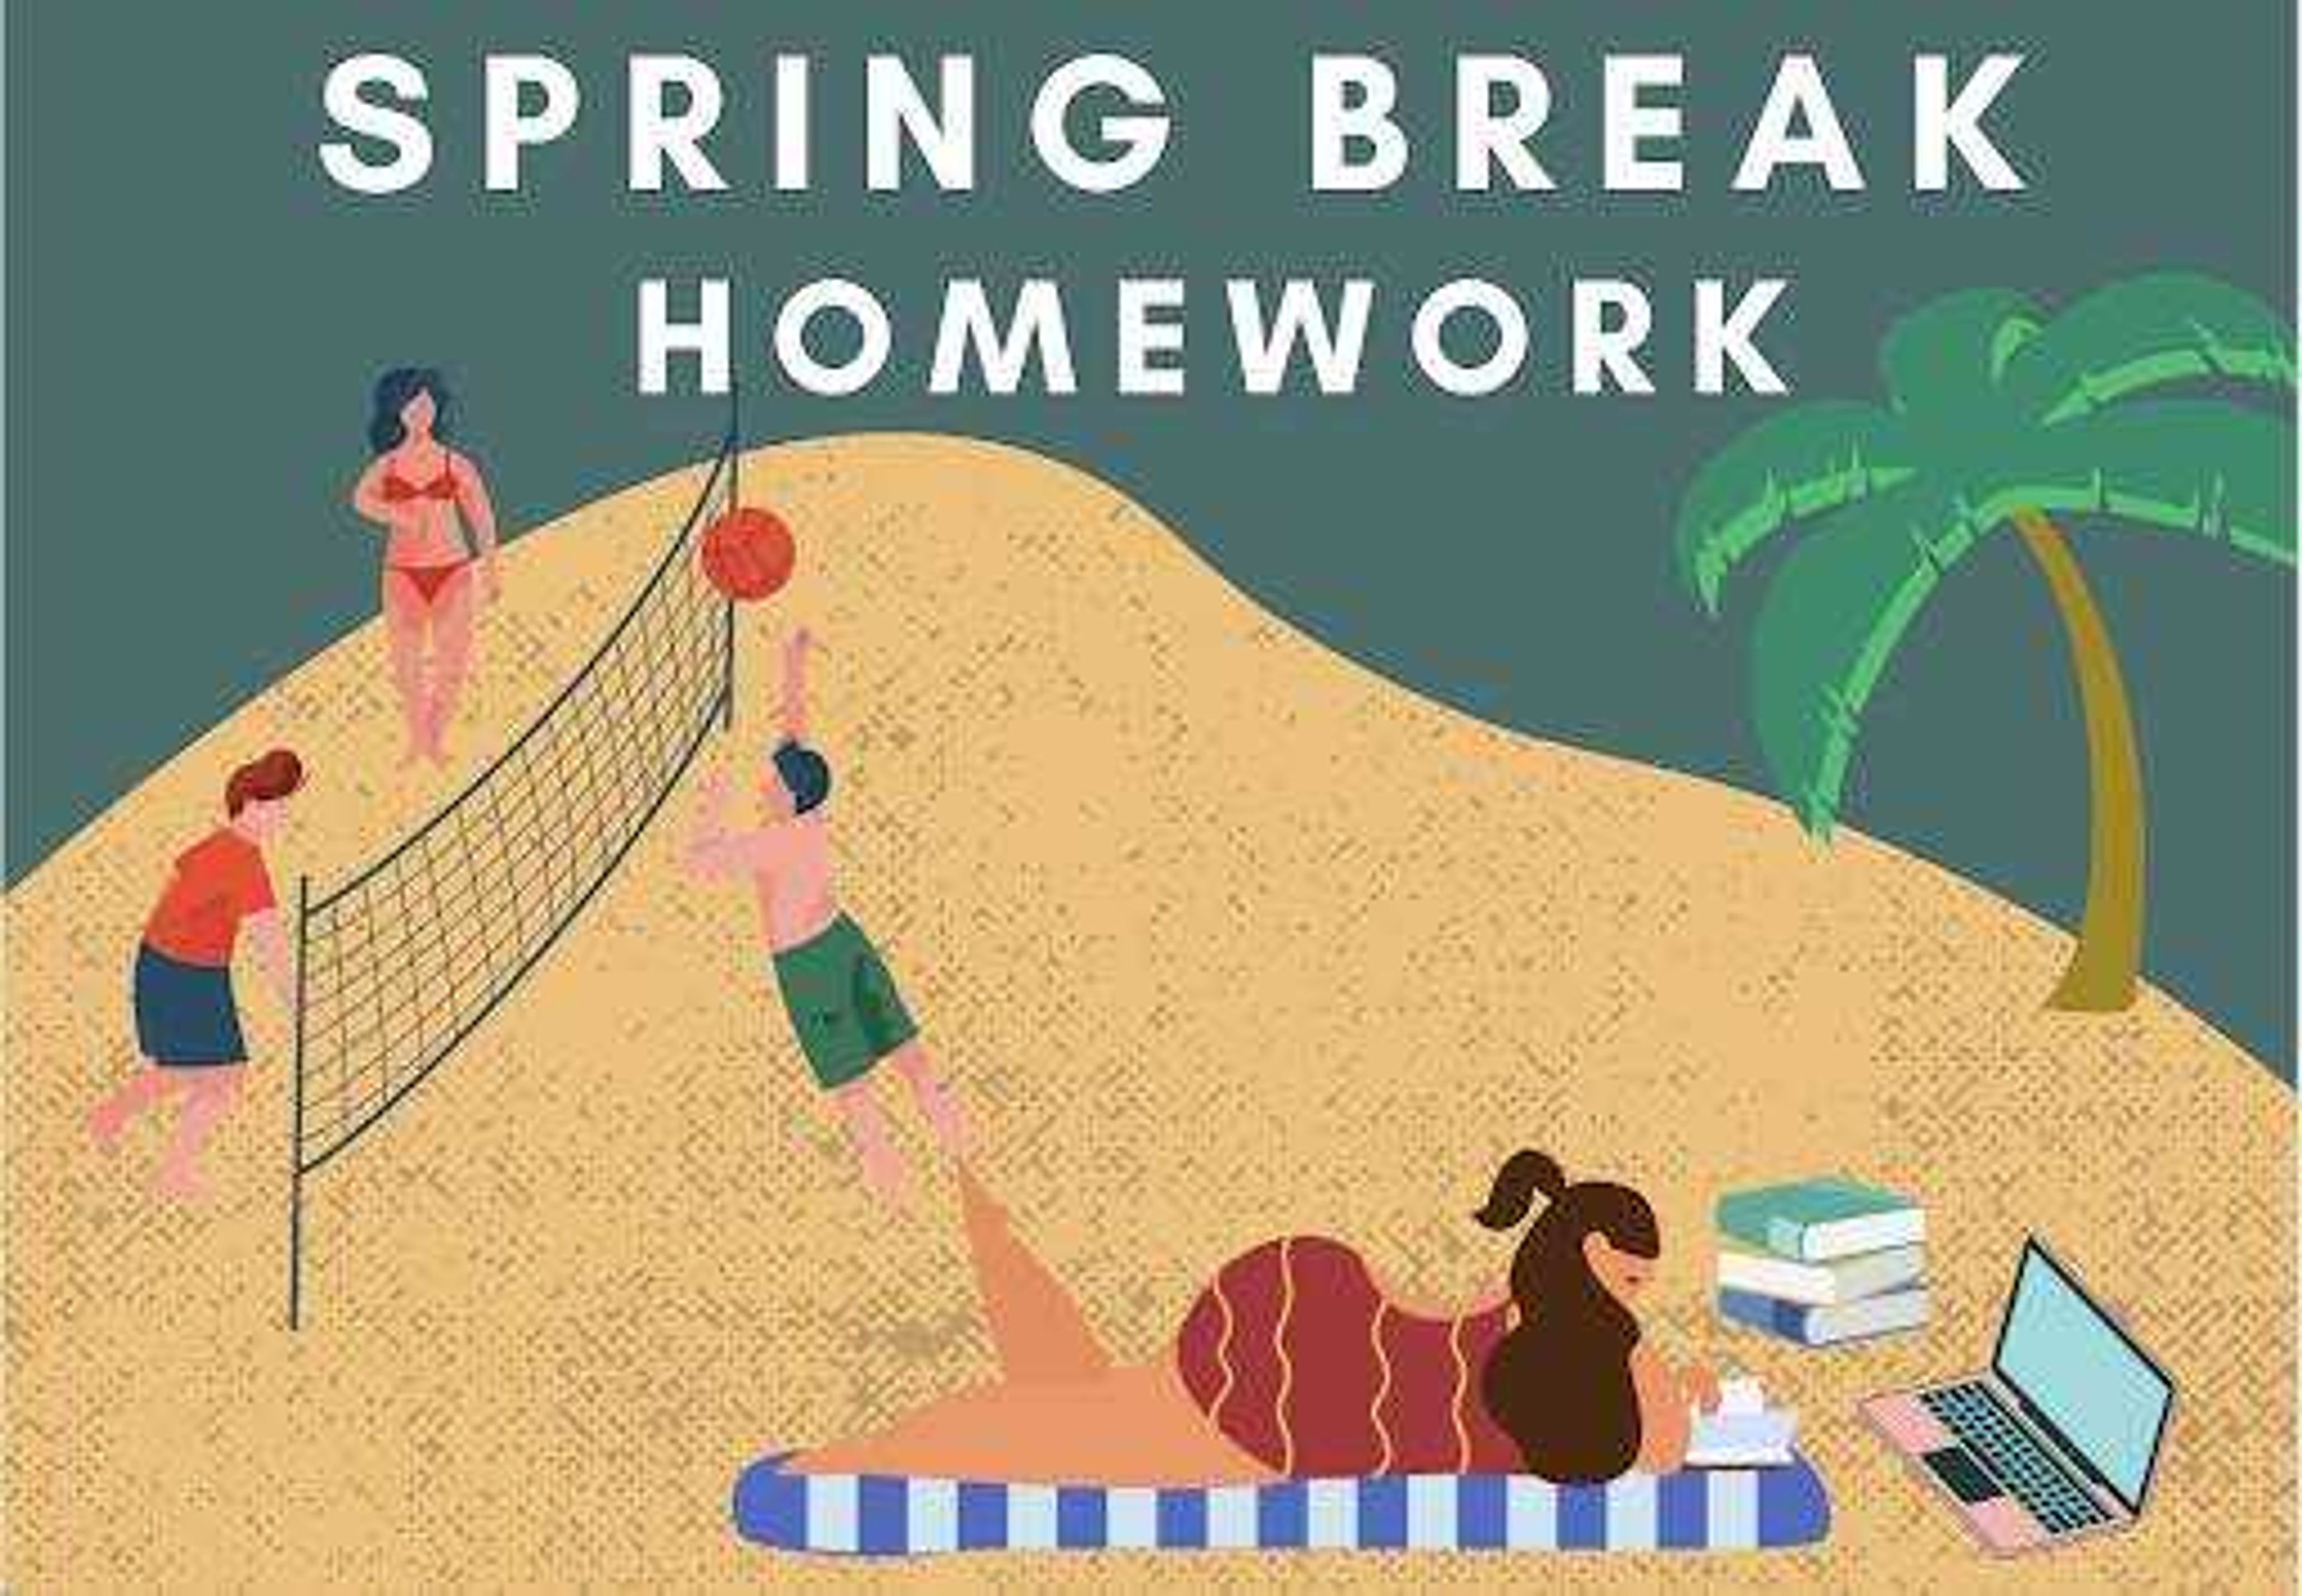 Faculty and students discuss homework over spring break